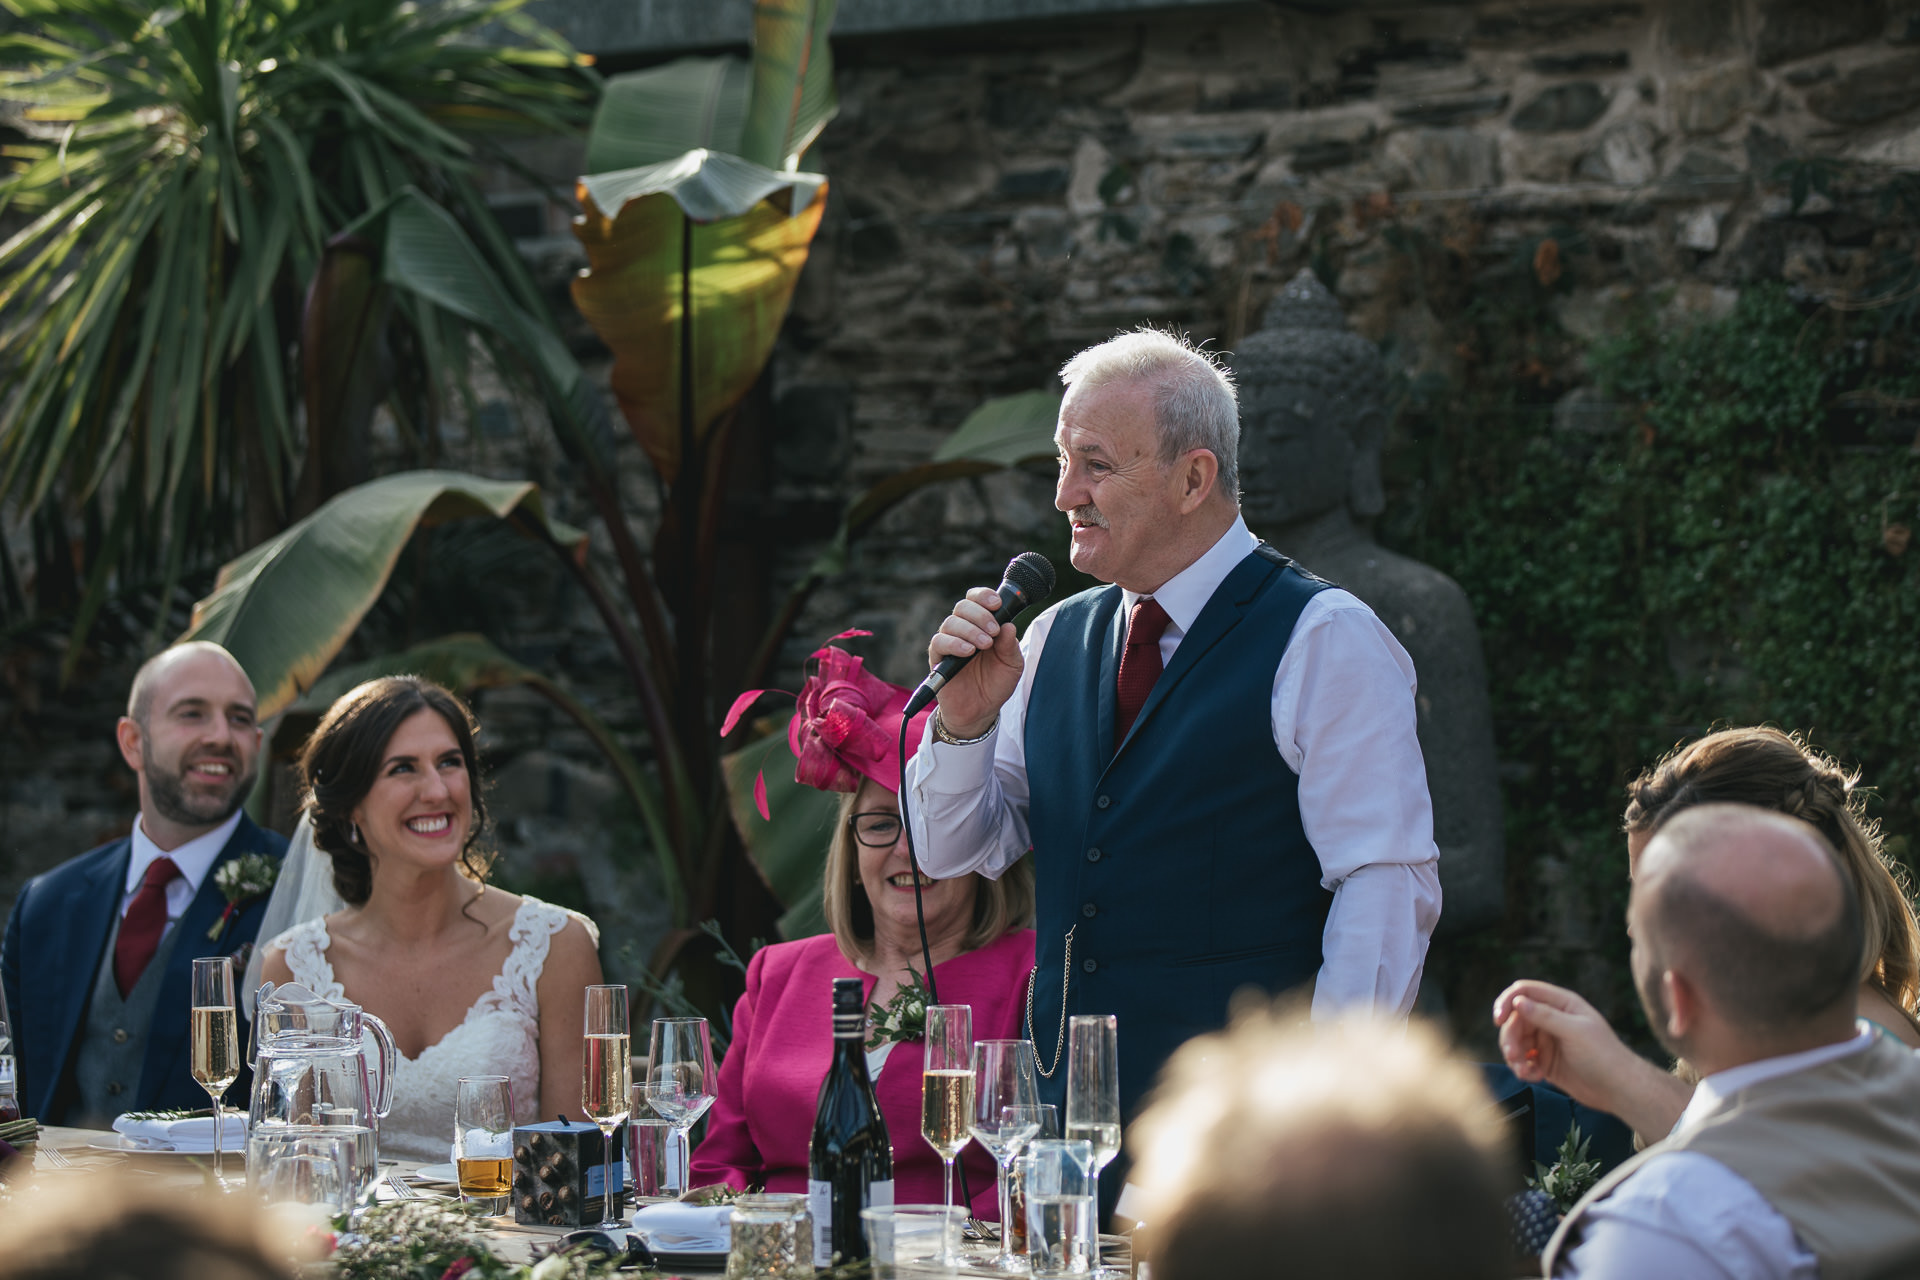 Father of the bride giving speech